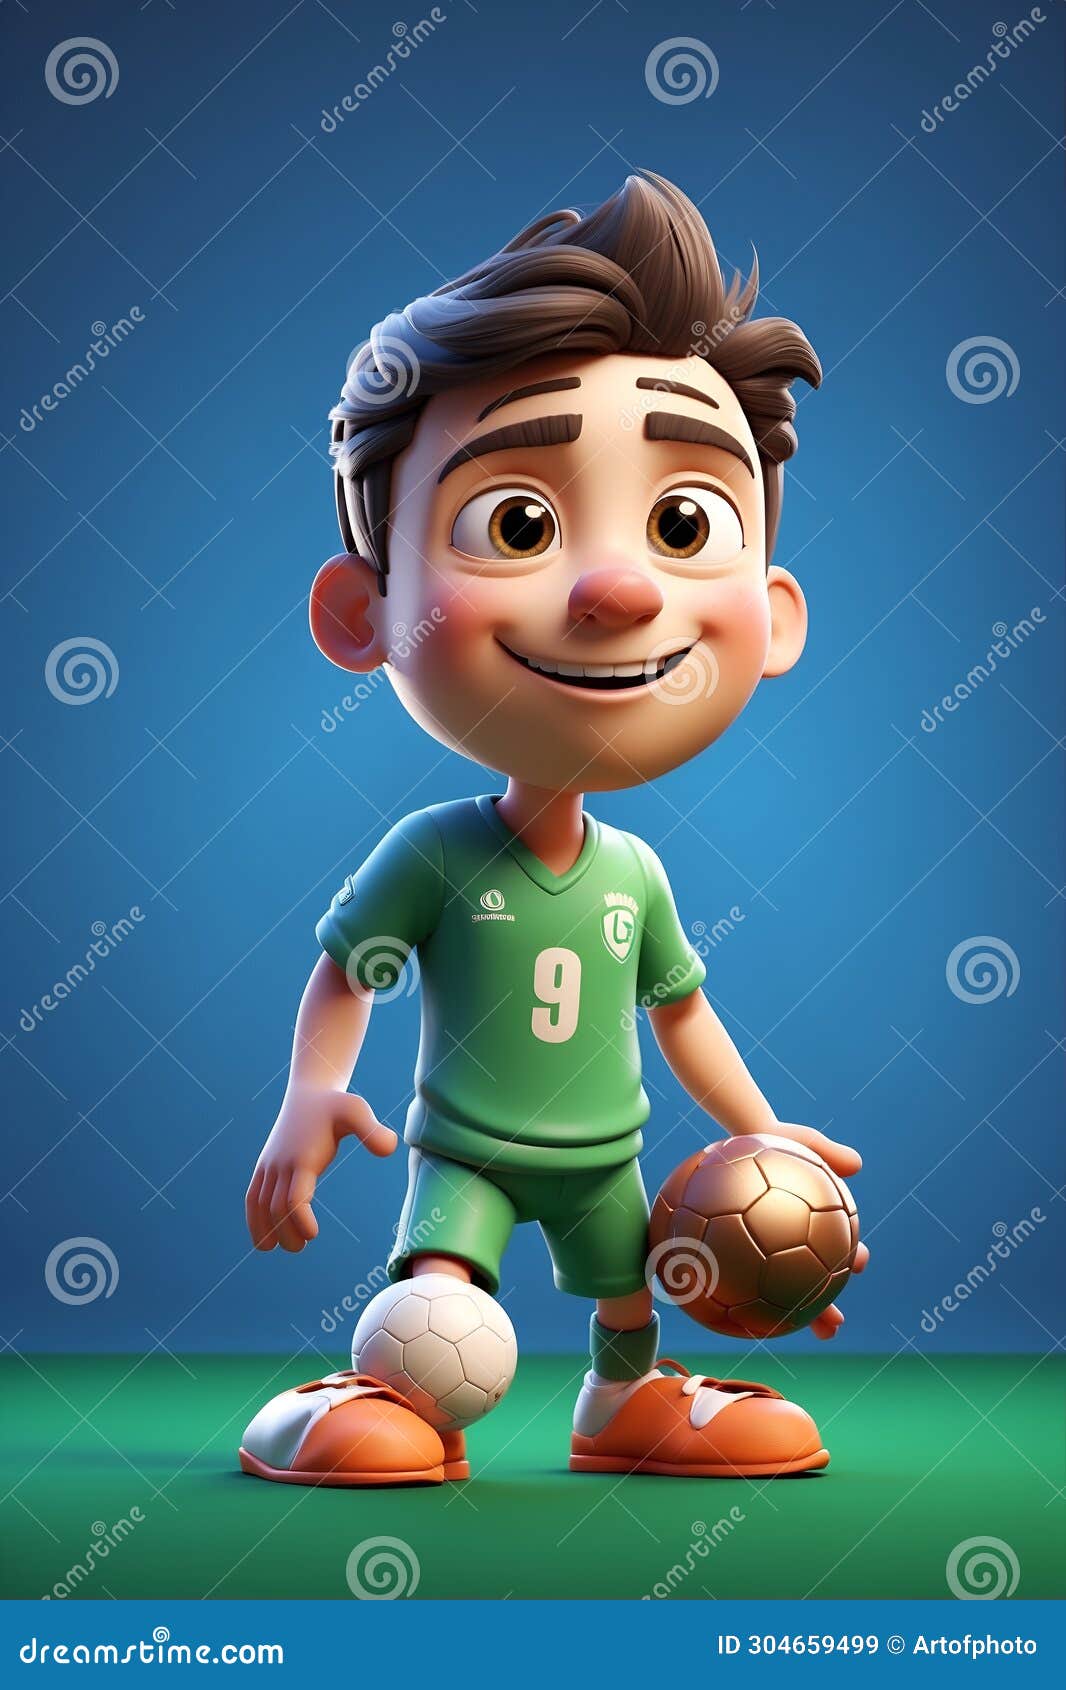 Cartoon Character Holding Soccer Ball - Fun and Playful Sports ...